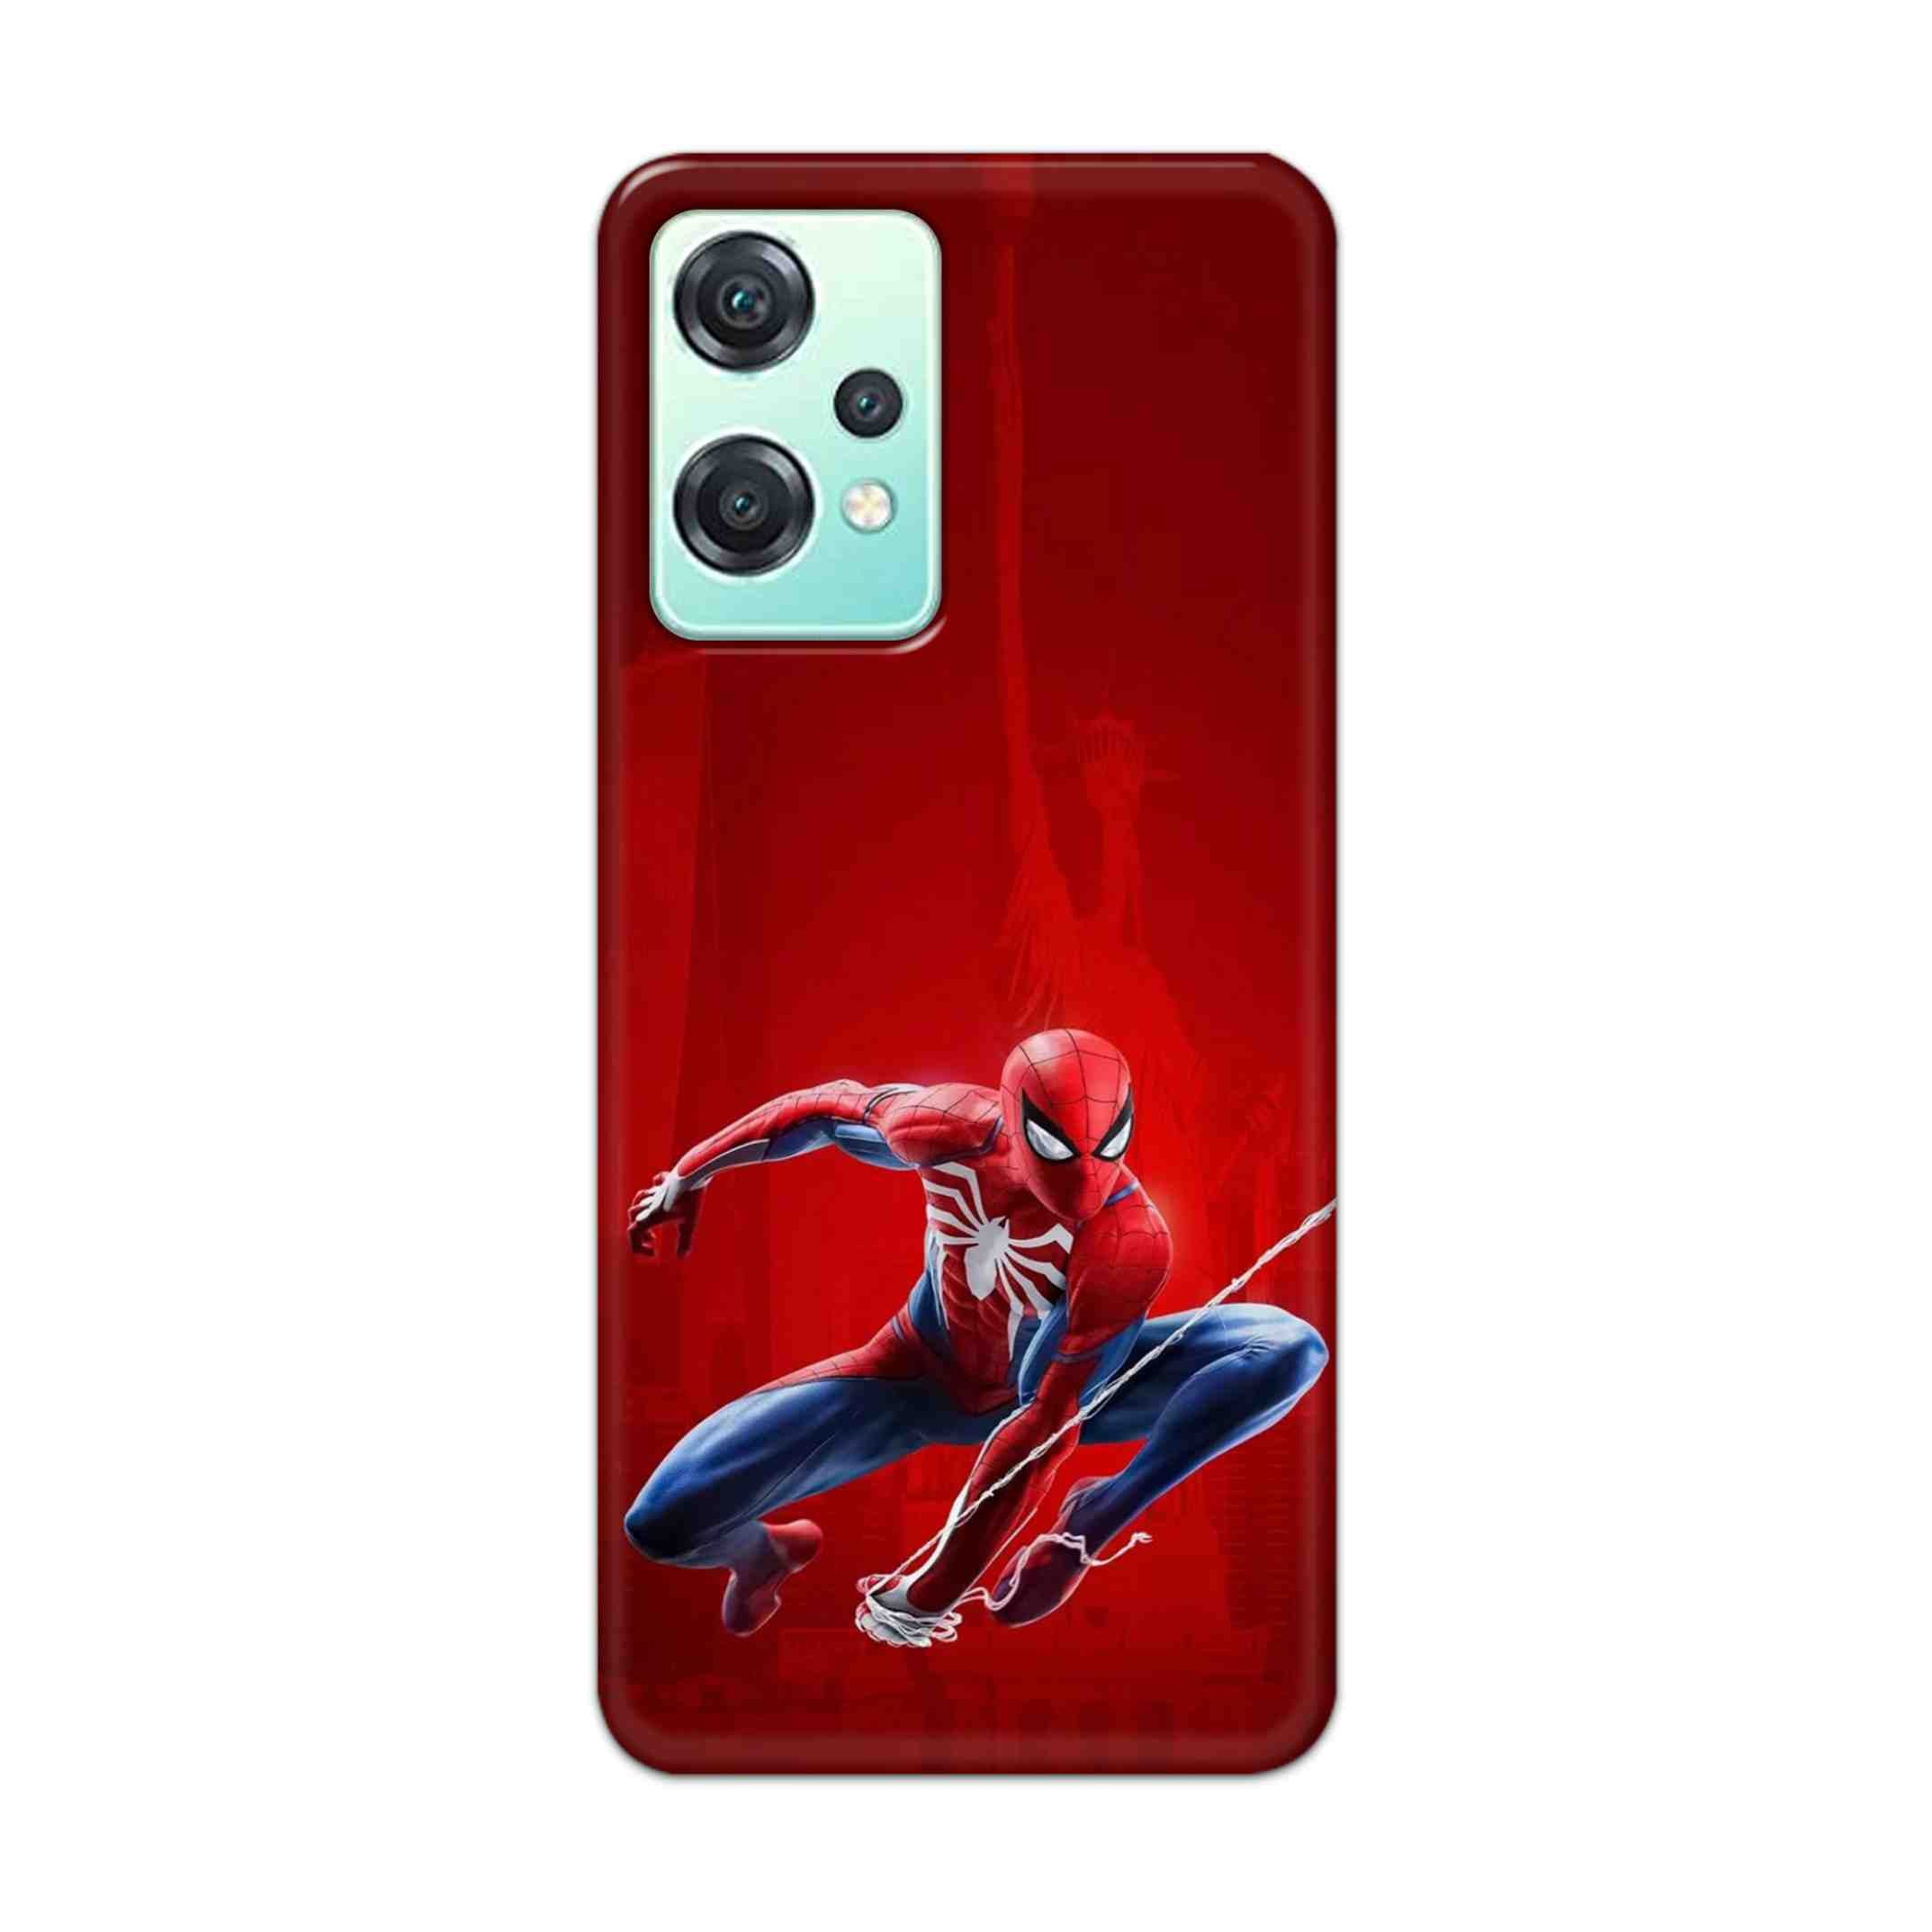 Buy Spiderman Hard Back Mobile Phone Case Cover For OnePlus Nord CE 2 Lite 5G Online